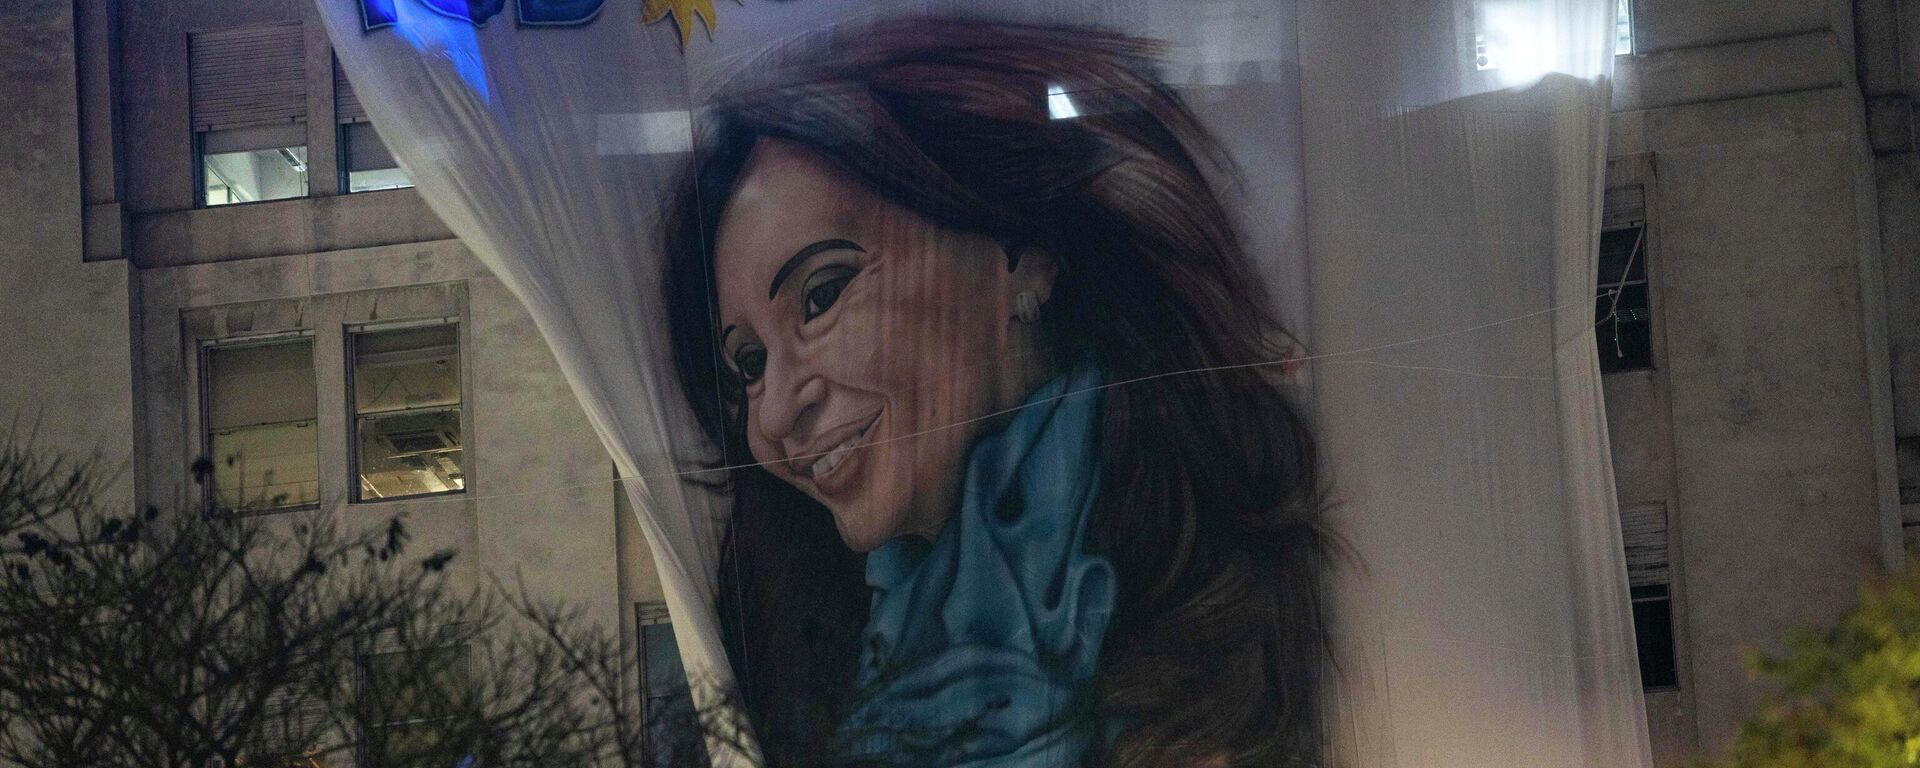 A flag with the portrait of Argentina's Vice President, Cristina Fernandez, hangs from a government building early Friday, Sept. 2, 2022, some hours after a person pointed a gun at her during an event in front of her home in the Recoleta neighborhood of Buenos Aires, Argentina. - Sputnik International, 1920, 02.09.2022